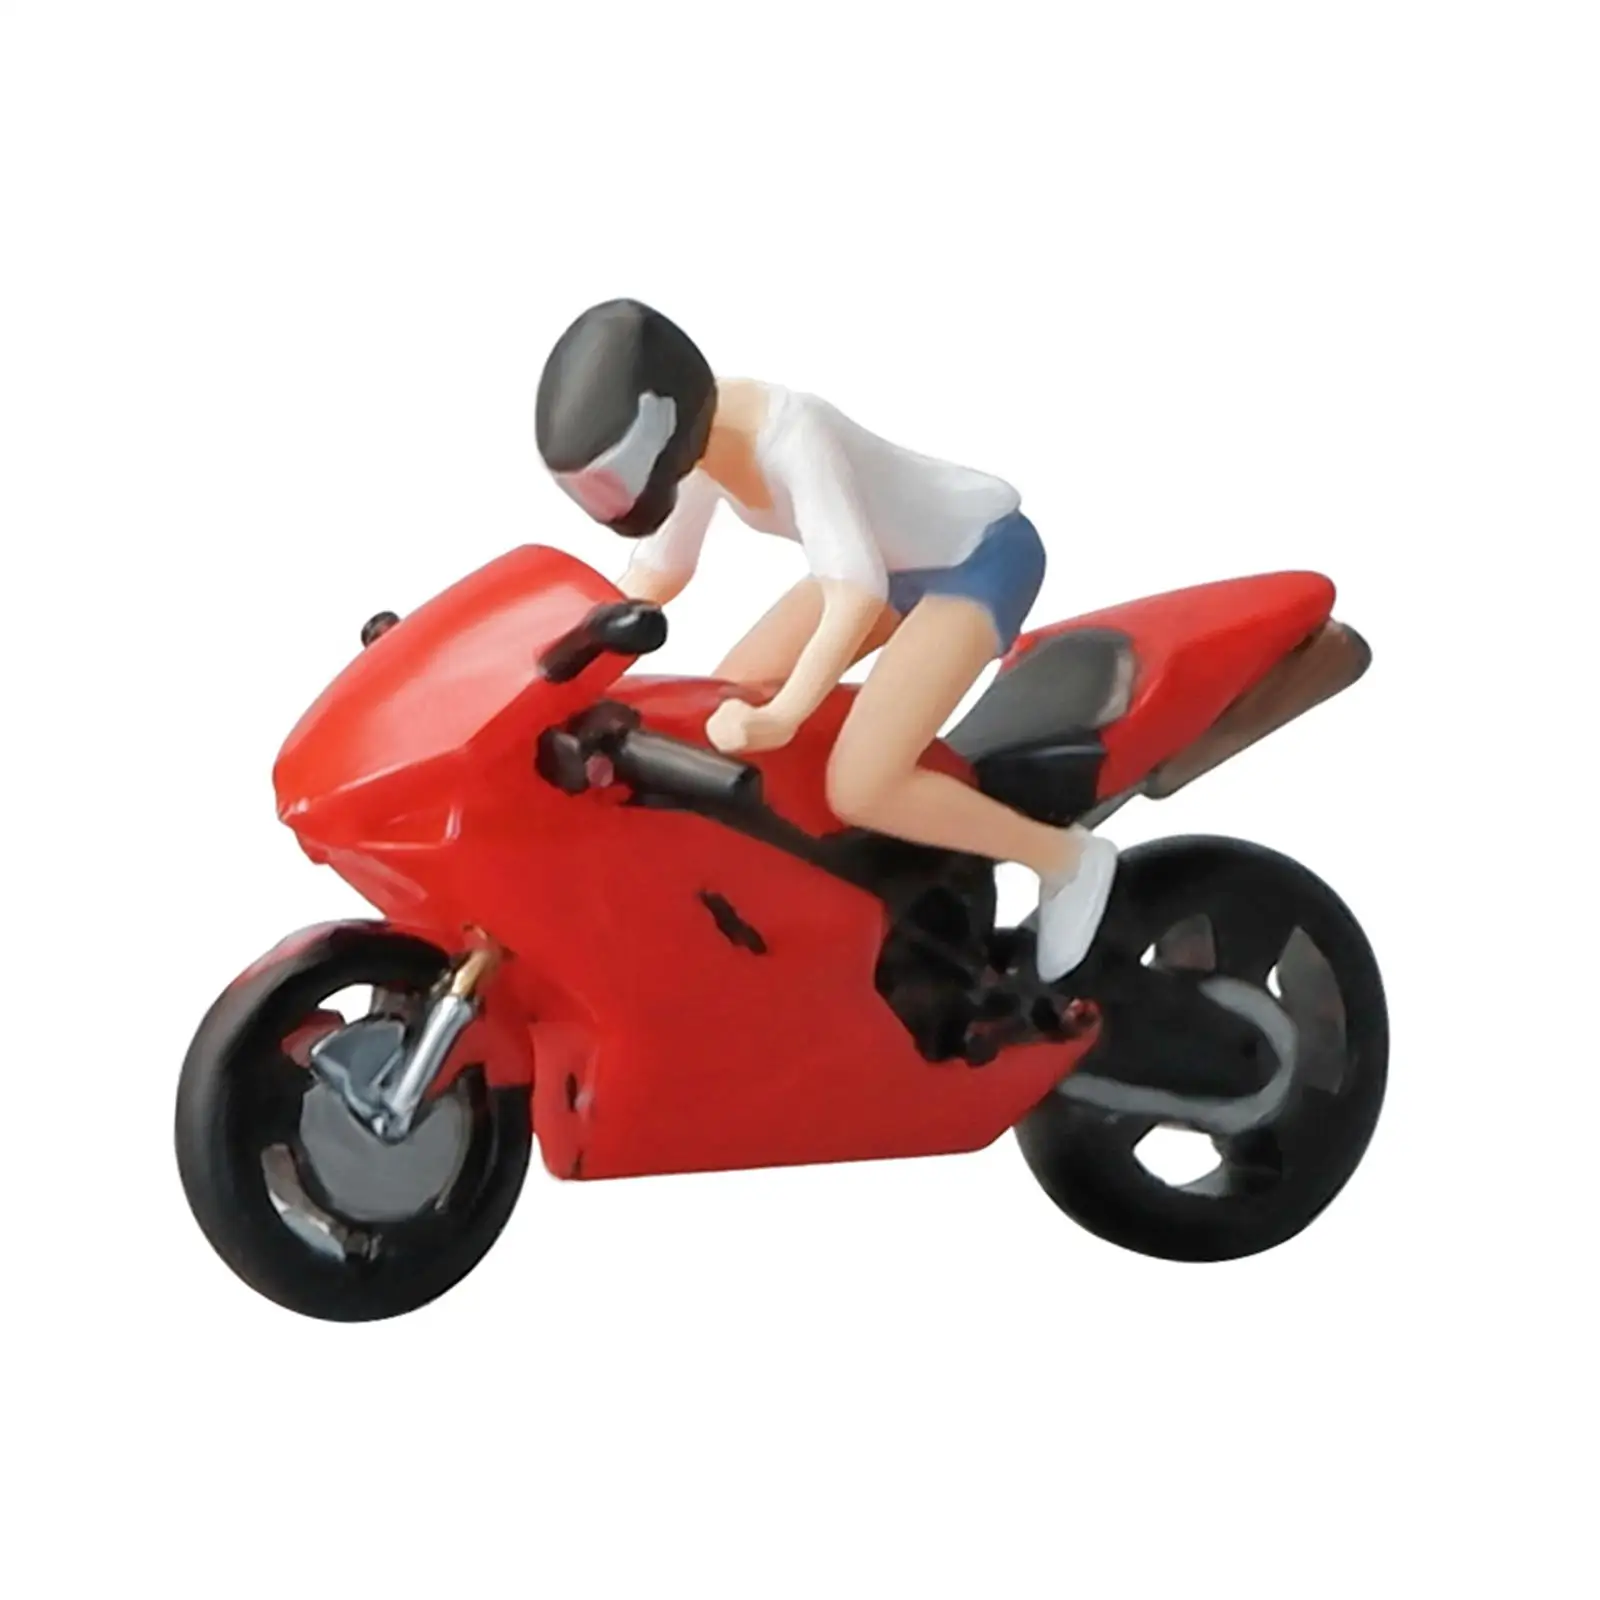 1/64 Motorcycle and Figures Model Mini People Model Movie Props Tiny People 1/64 Model People Figures DIY Projects Accessory